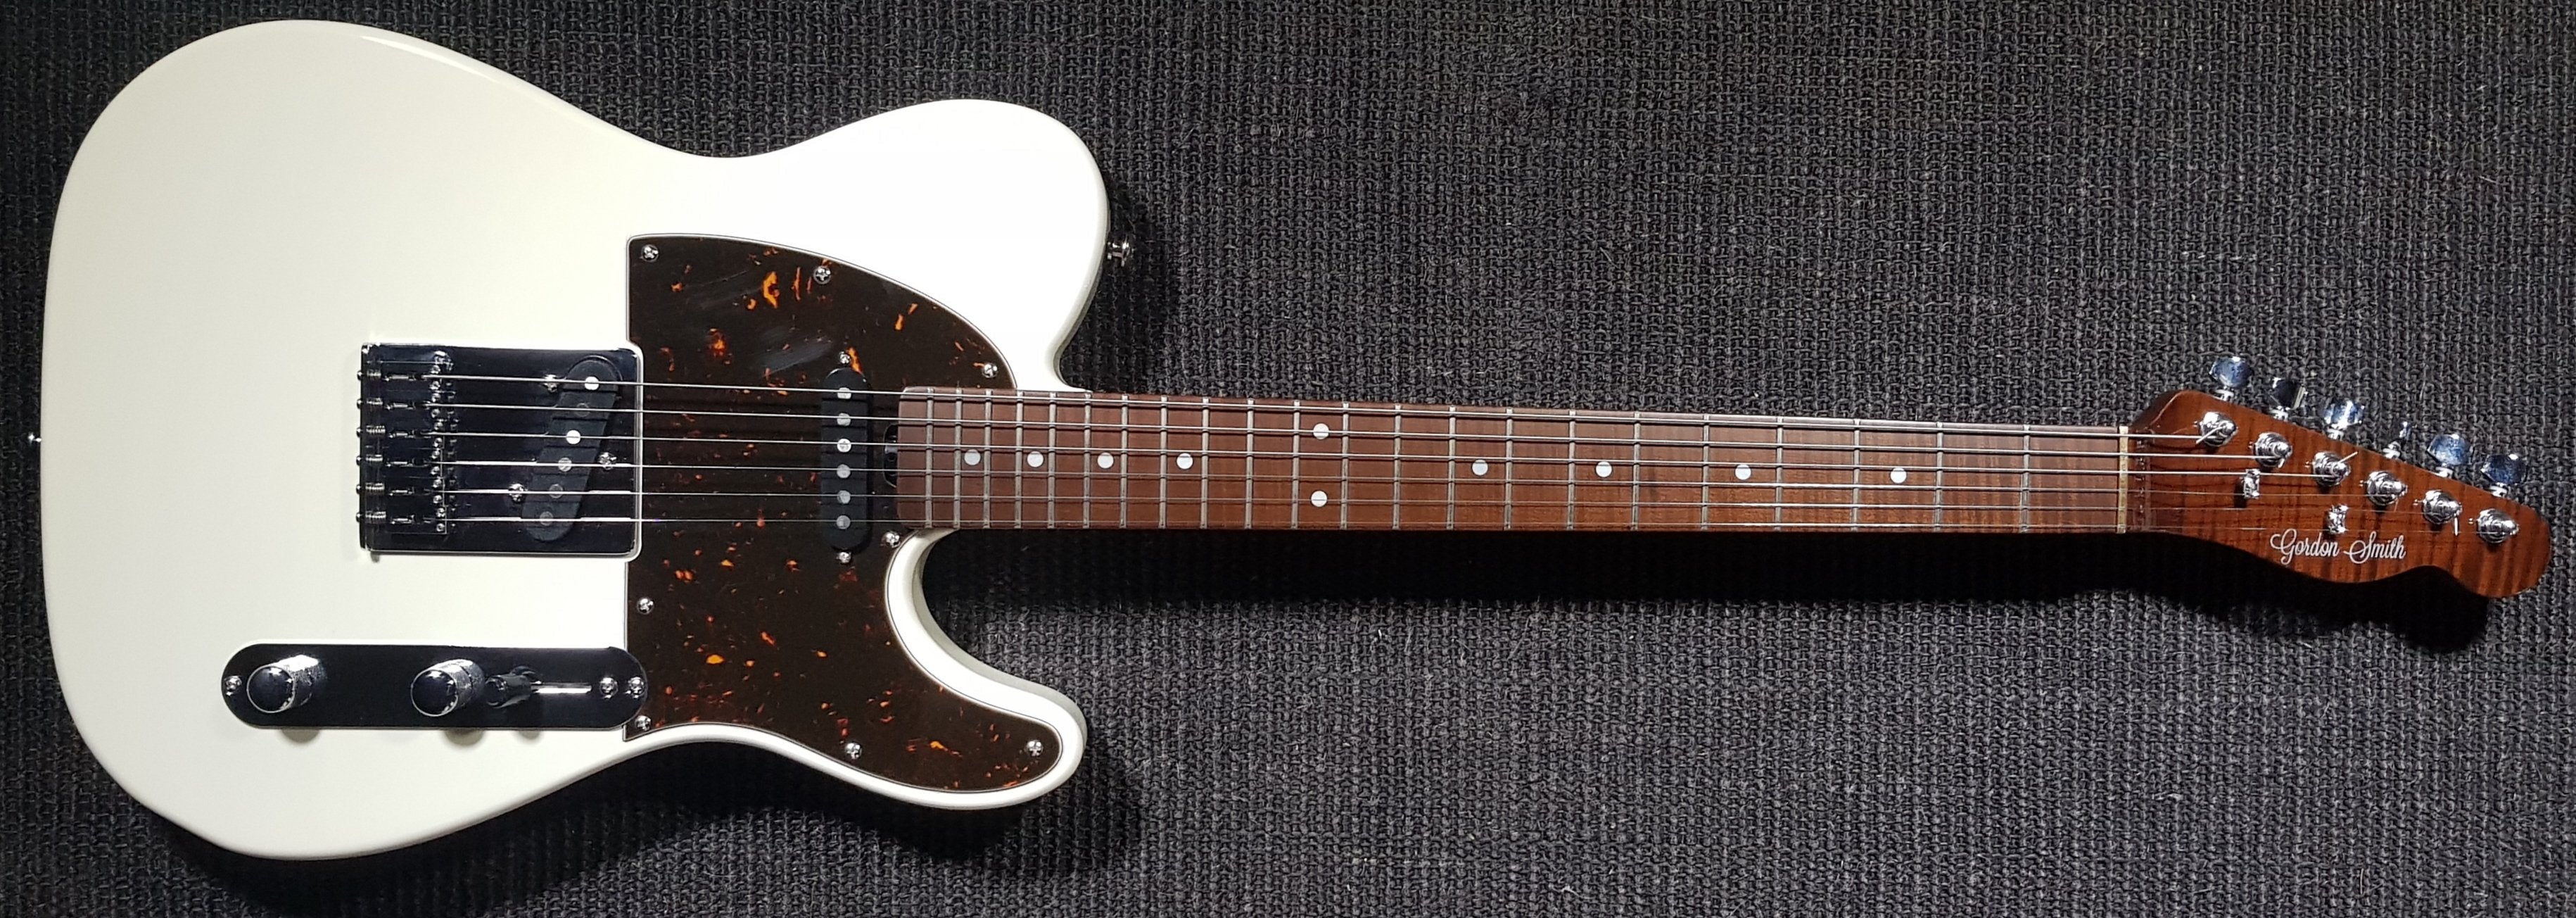 Gordon Smith Classic T - White With Chocolate Roast Maple Neck, Electric Guitar for sale at Richards Guitars.